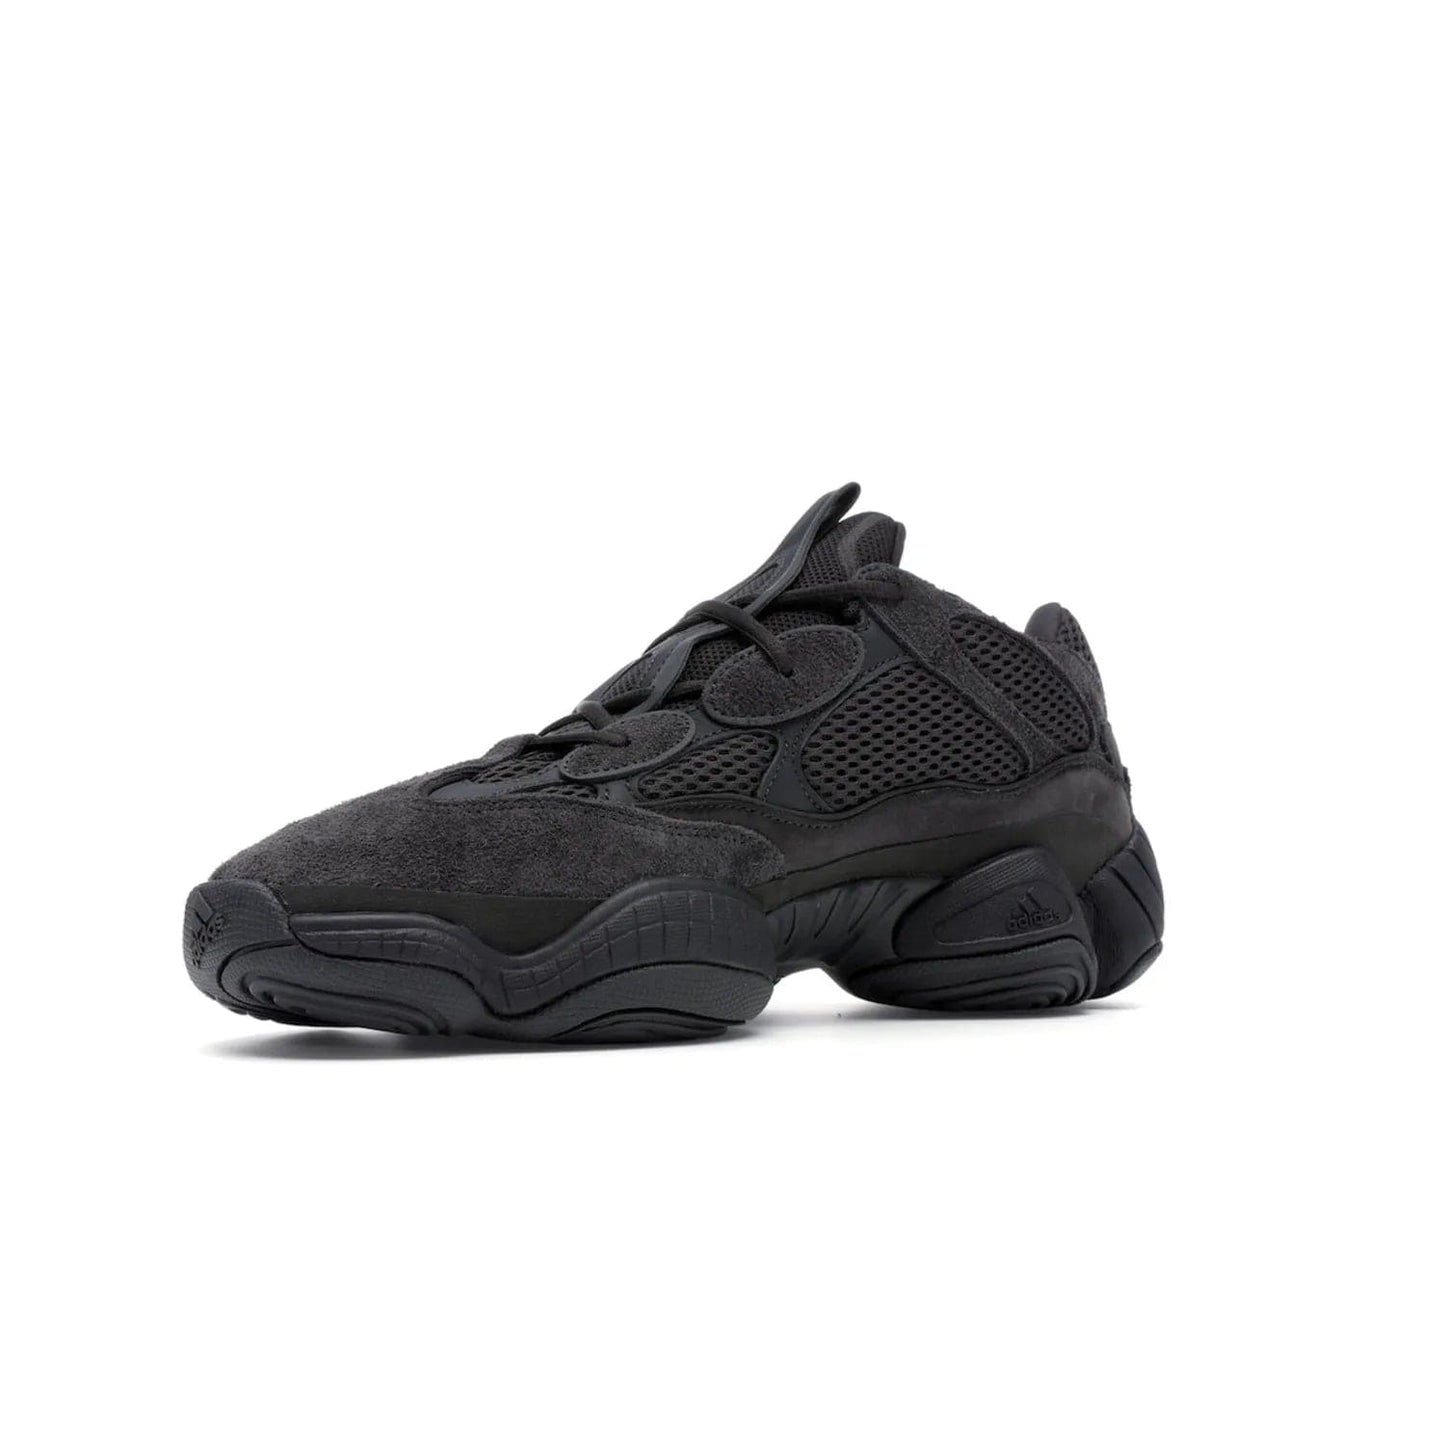 adidas Yeezy 500 Utility Black - Image 16 - Only at www.BallersClubKickz.com - Iconic adidas Yeezy 500 Utility Black in All-Black colorway. Durable black mesh and suede upper with adiPRENE® sole delivers comfort and support. Be unstoppable with the Yeezy 500 Utility Black. Released July 2018.